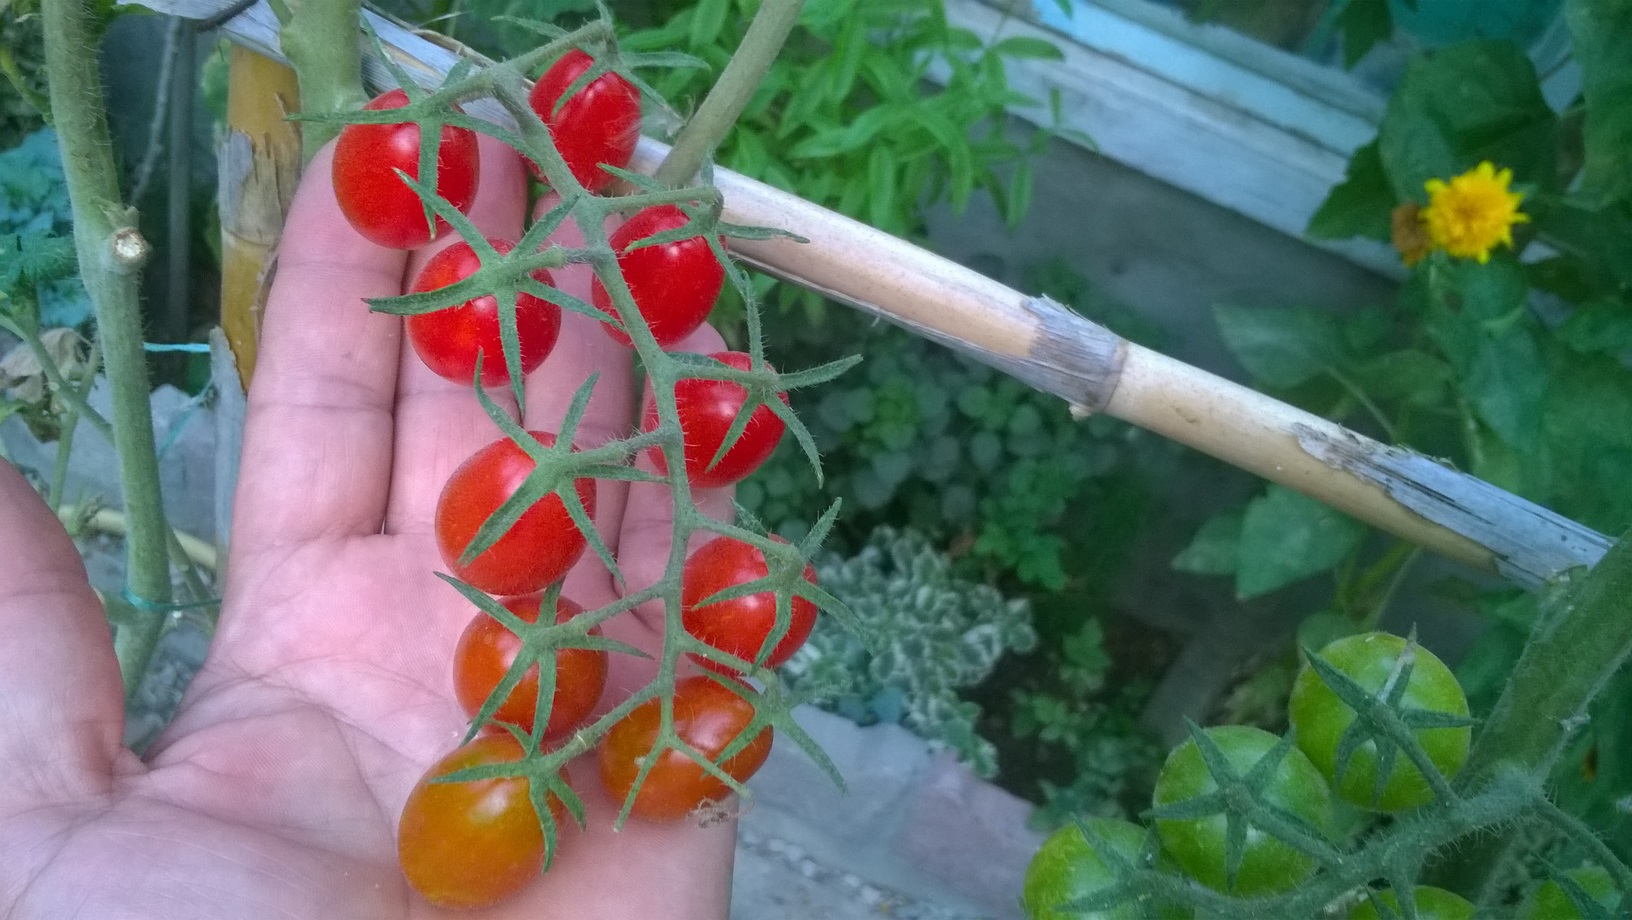 Once tomatoes start ripening, check plants each day and pick those that are ready